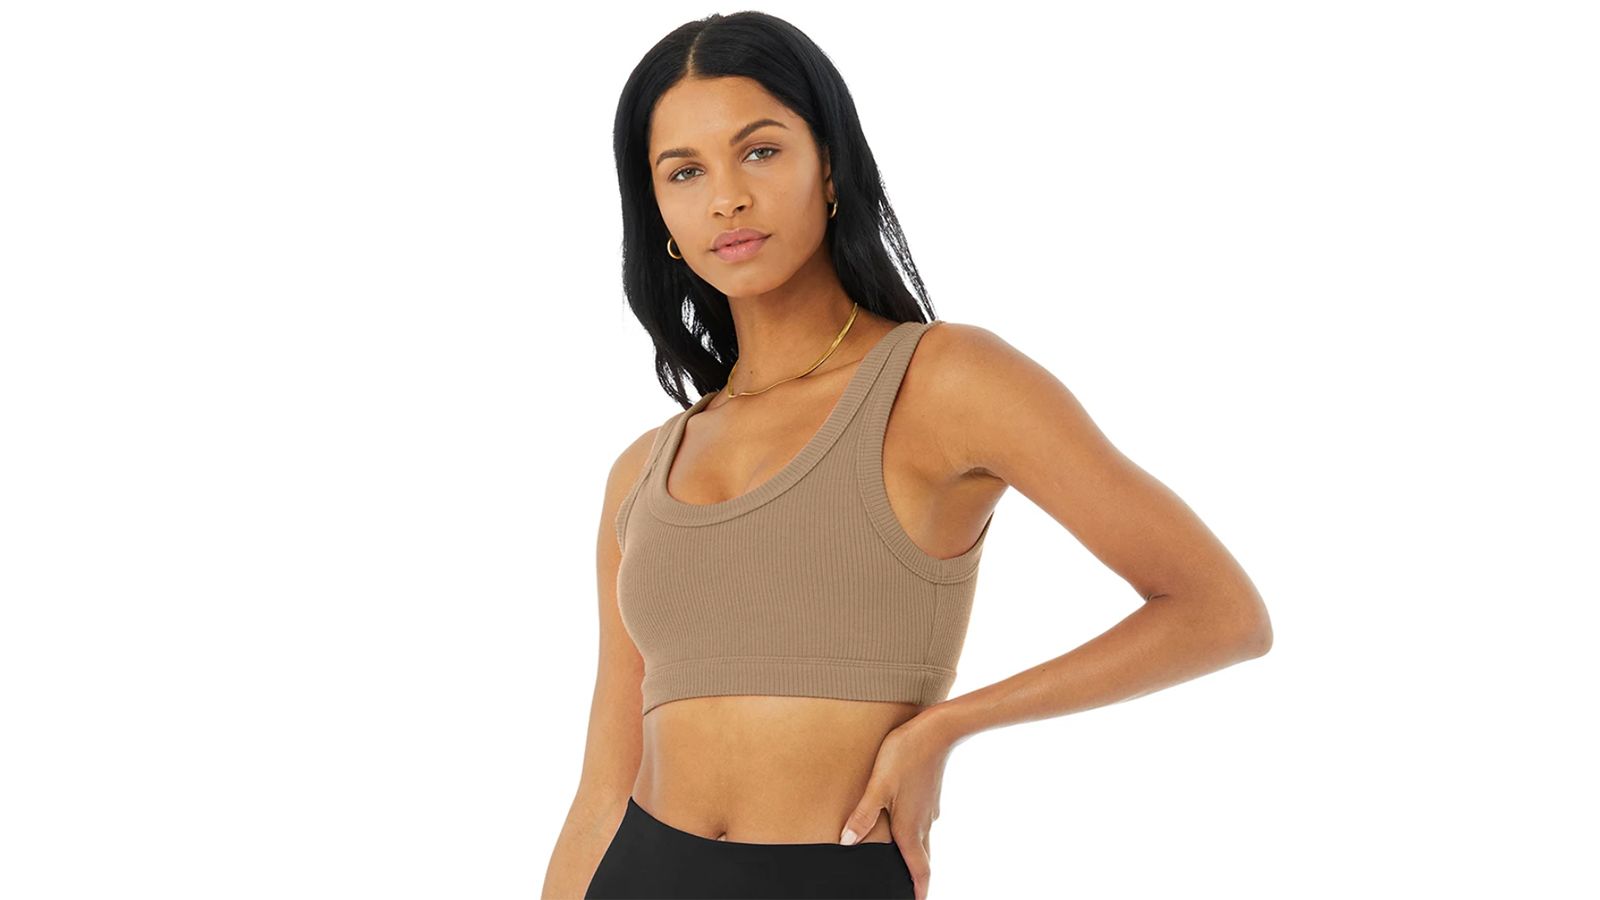 Workout Gear Inspired By Lululemon on  - An Unblurred Lady  Womens  workout outfits, Women's sports bras, Active wear for women